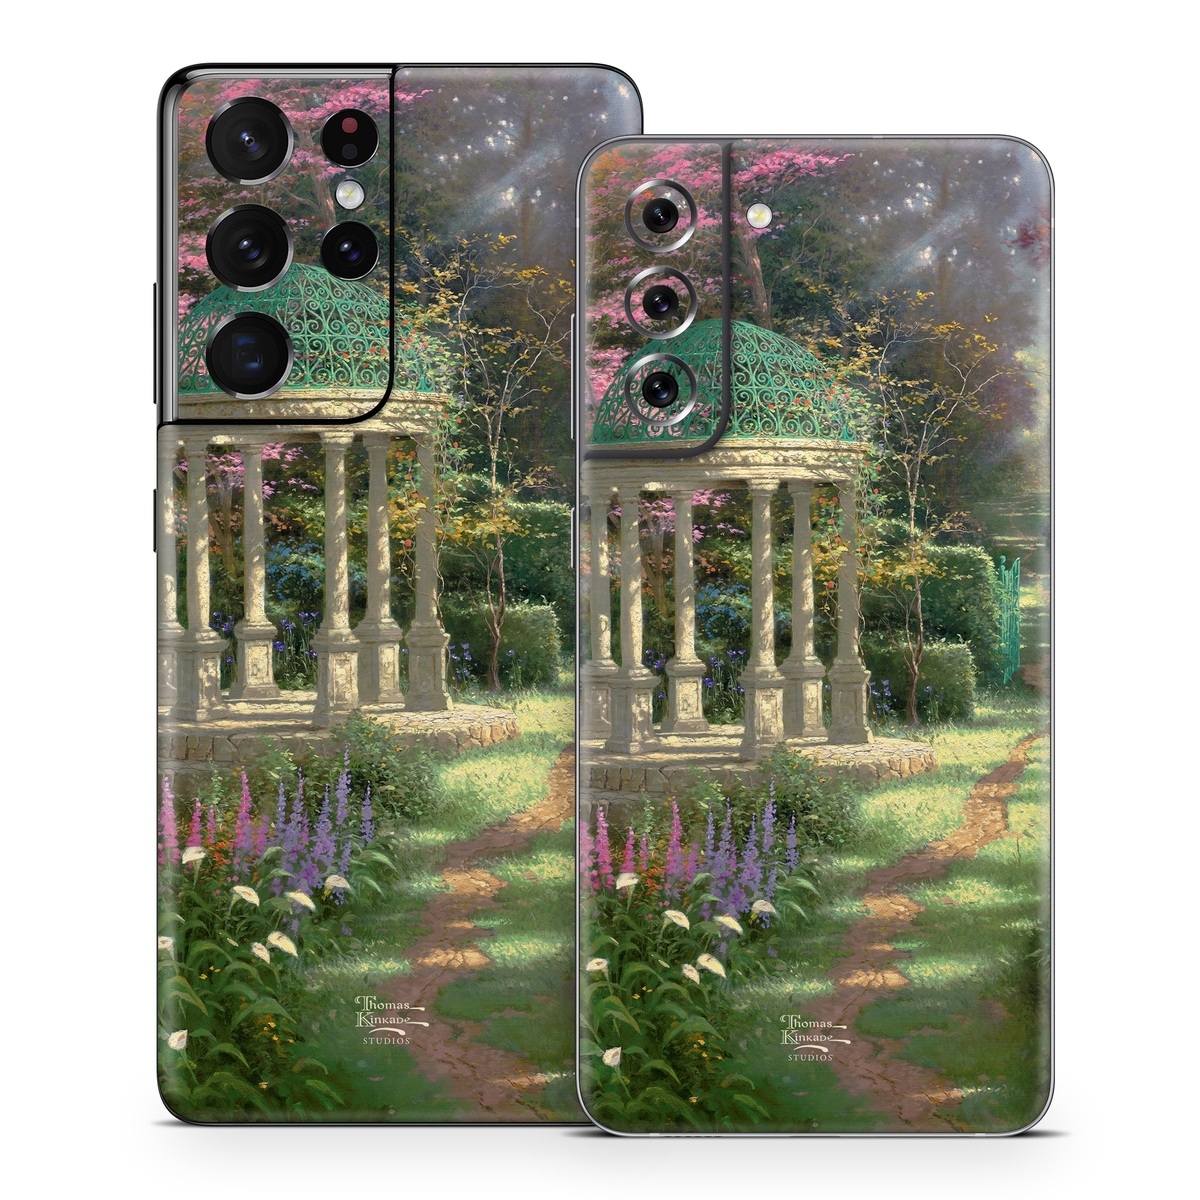 Samsung Galaxy S21 Series Skin design of Nature, Natural landscape, Tree, Botany, Water, Garden, Gazebo, Spring, Plant, Reflection, with black, gray, green, red, purple colors